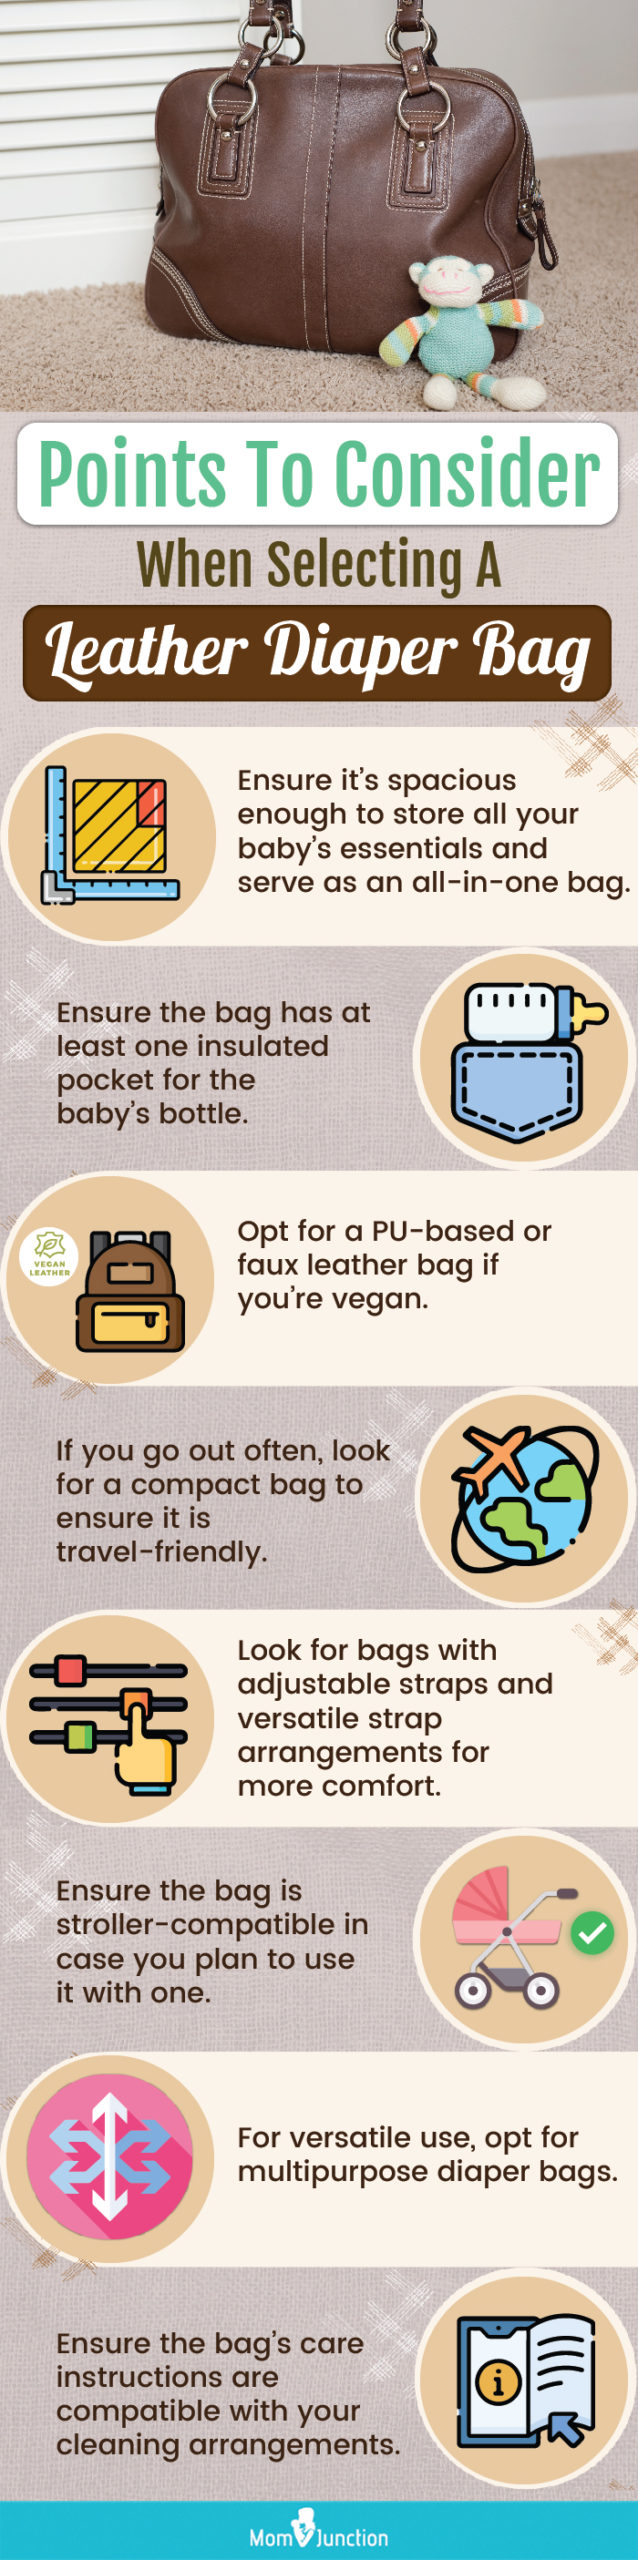 Points To Consider When Selecting A Leather Diaper Bag (Infographic)